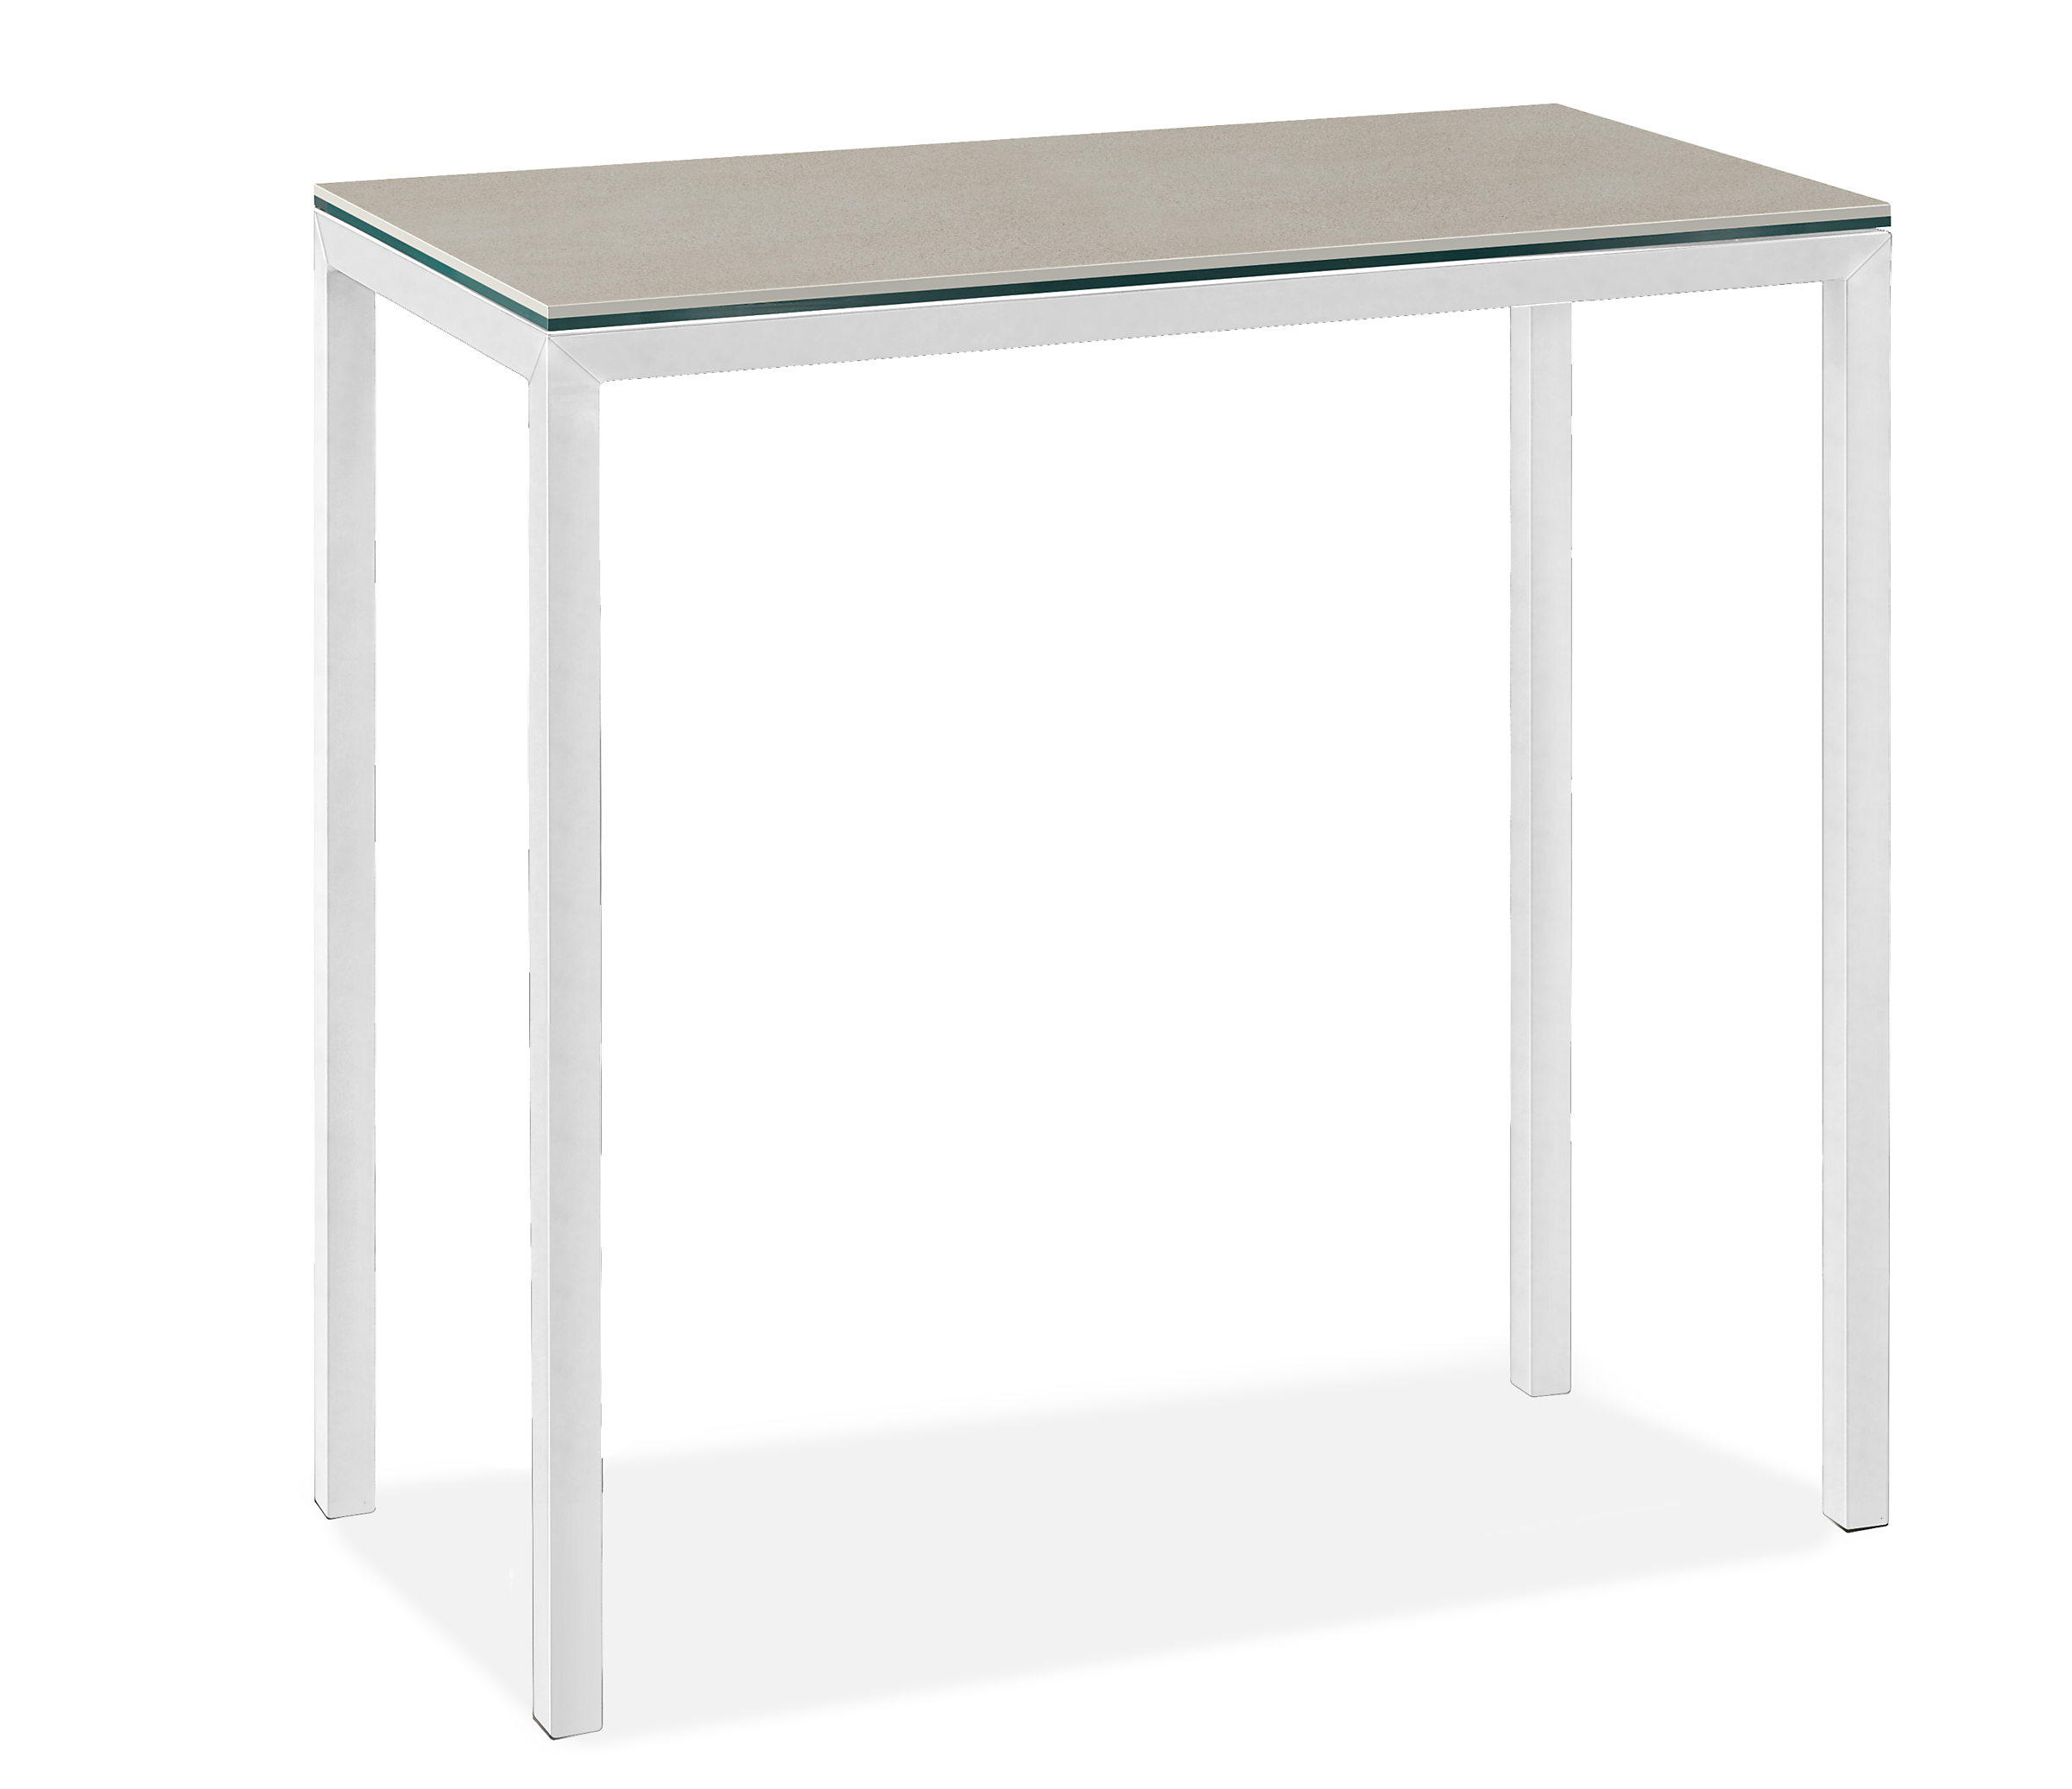 Parsons 36w 18d 35h Counter Table with 1.5" Leg